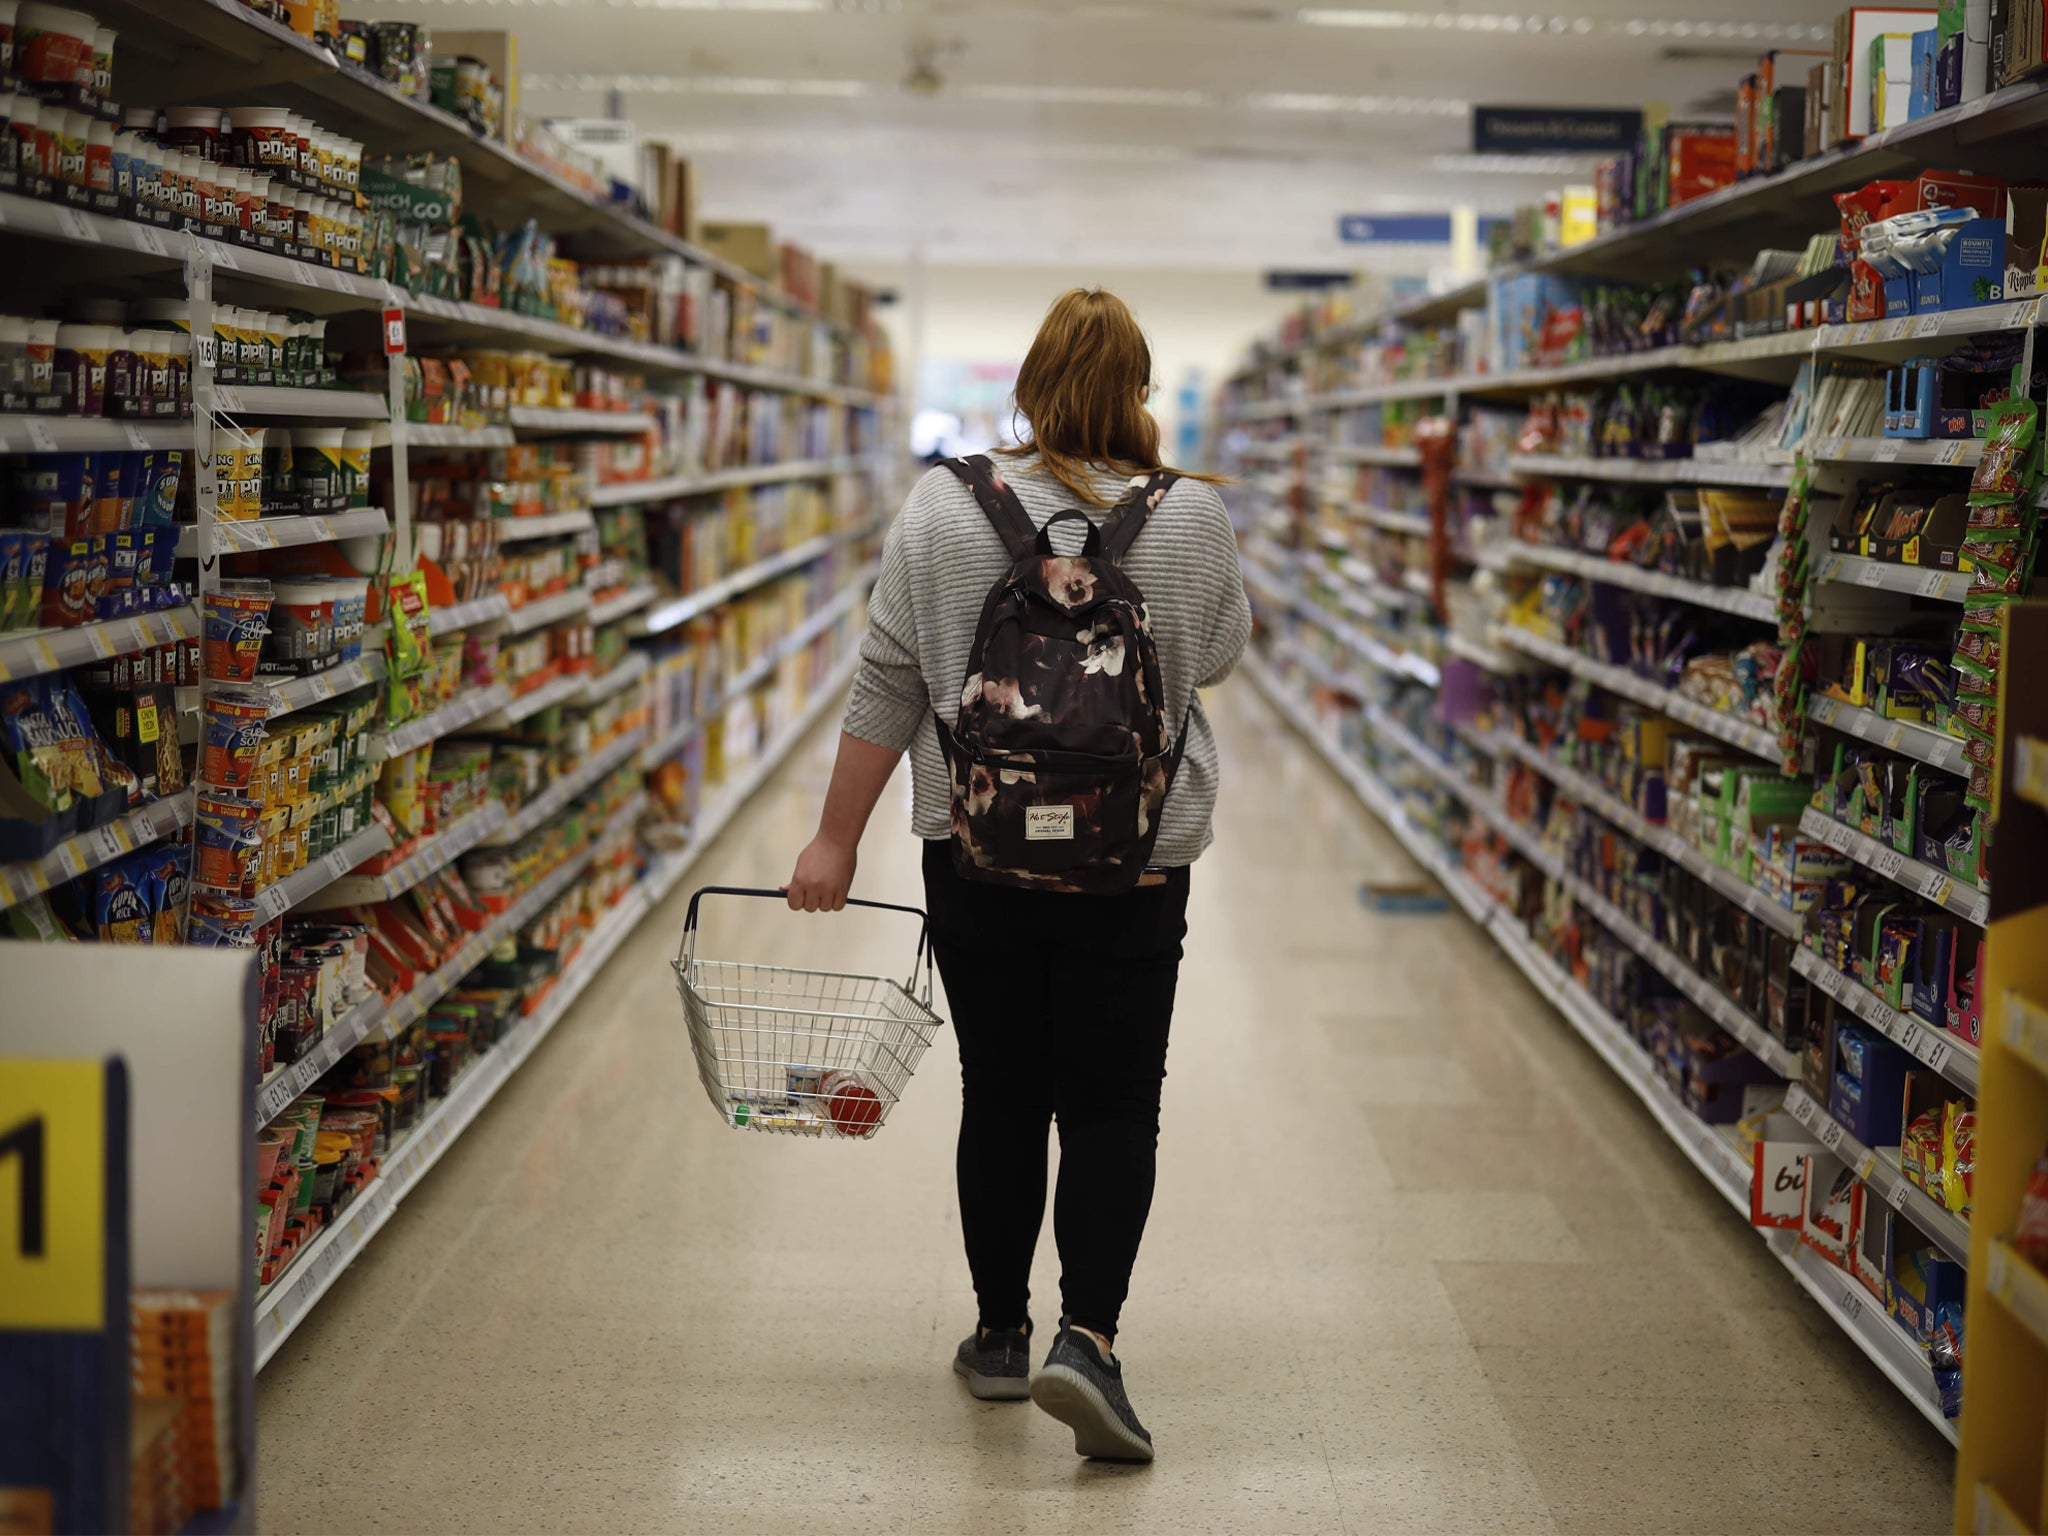 The average adult estimates 38 per cent of the groceries they purchase are eco-friendly